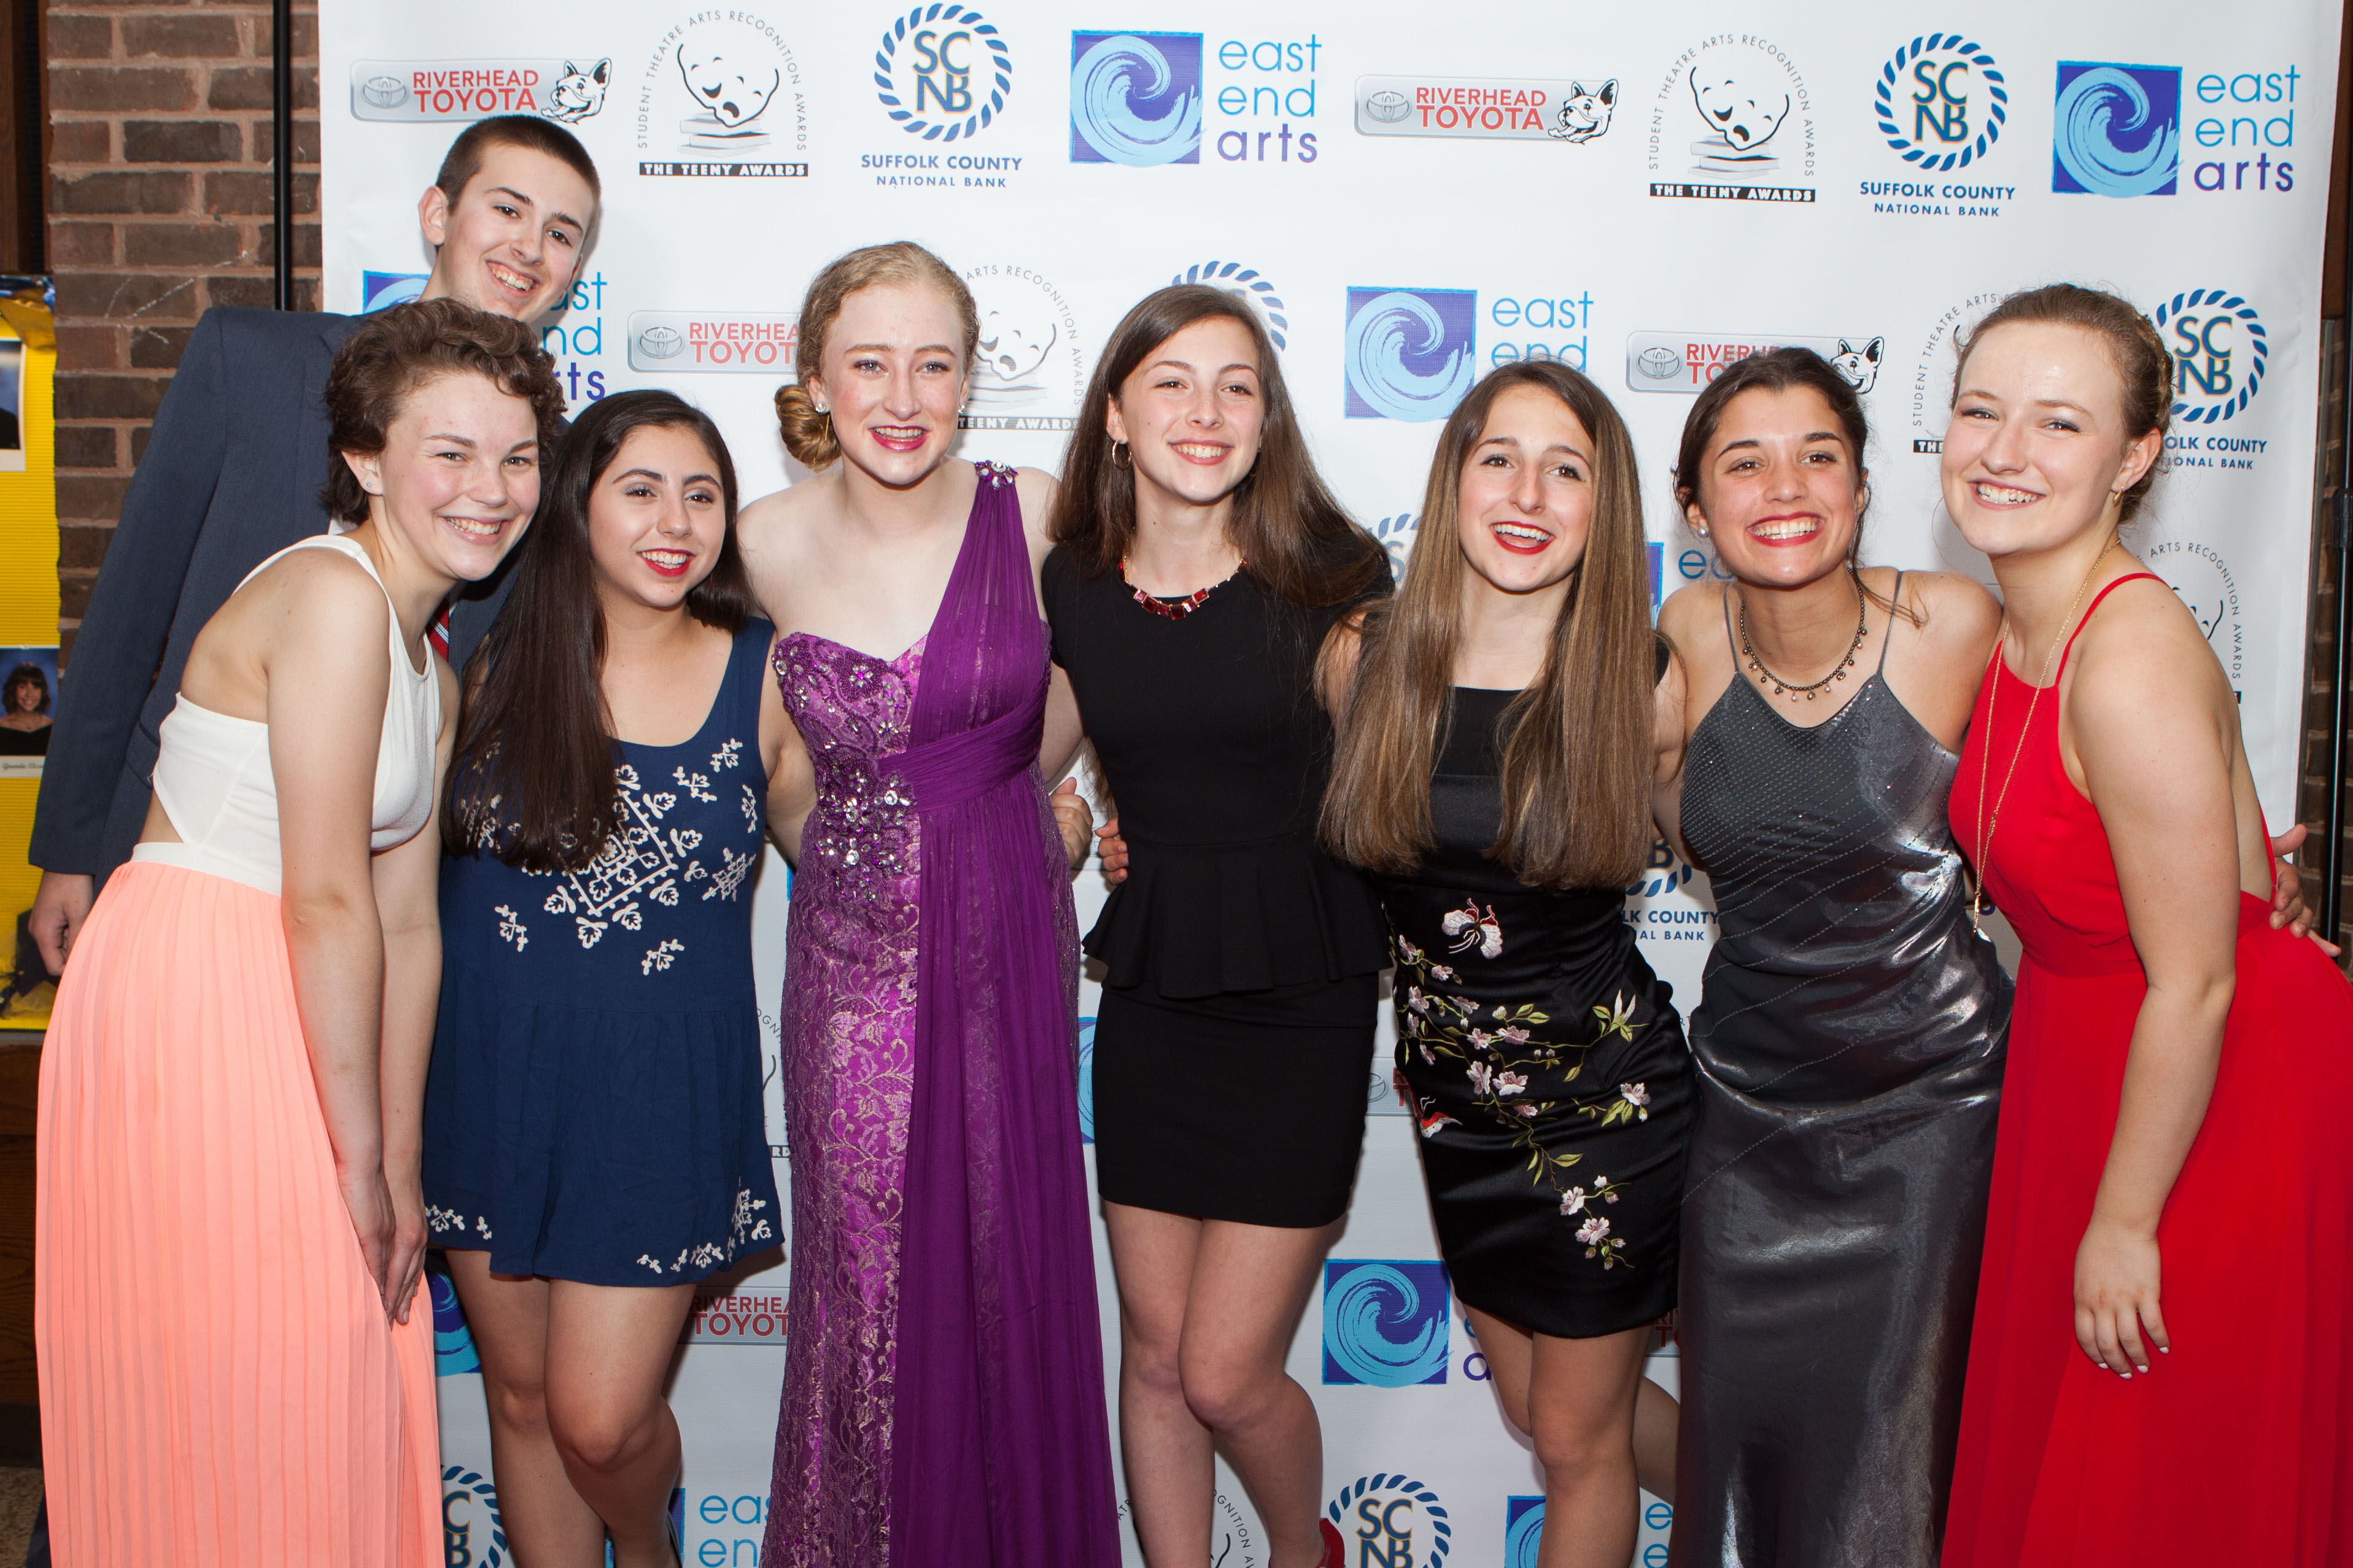 Southold High School students pose on the red carpet at the Teeny Awards Sunday. (Credit: Katharine Schroeder)